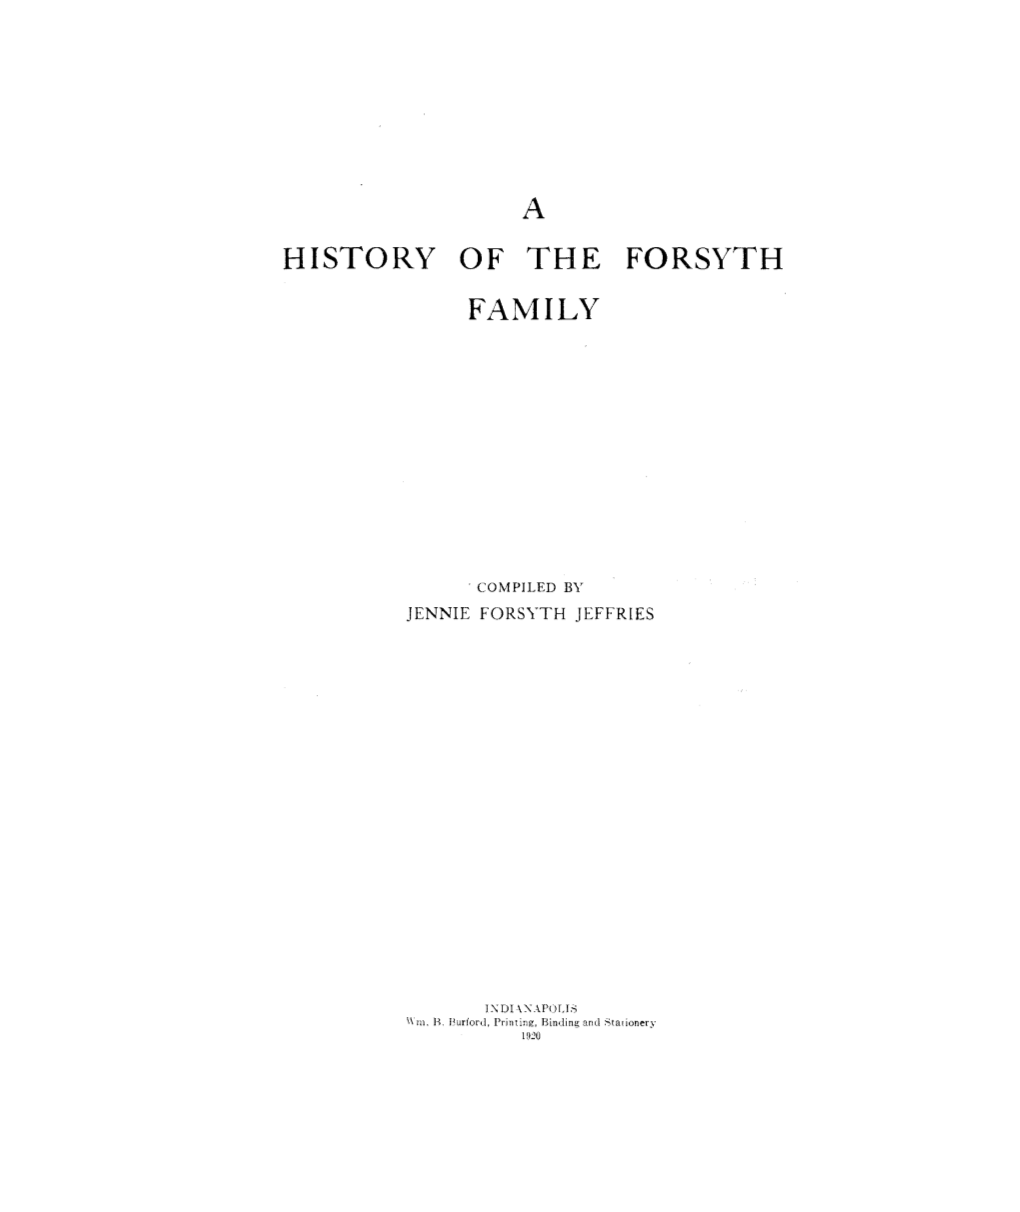 History of the Forsyth Family